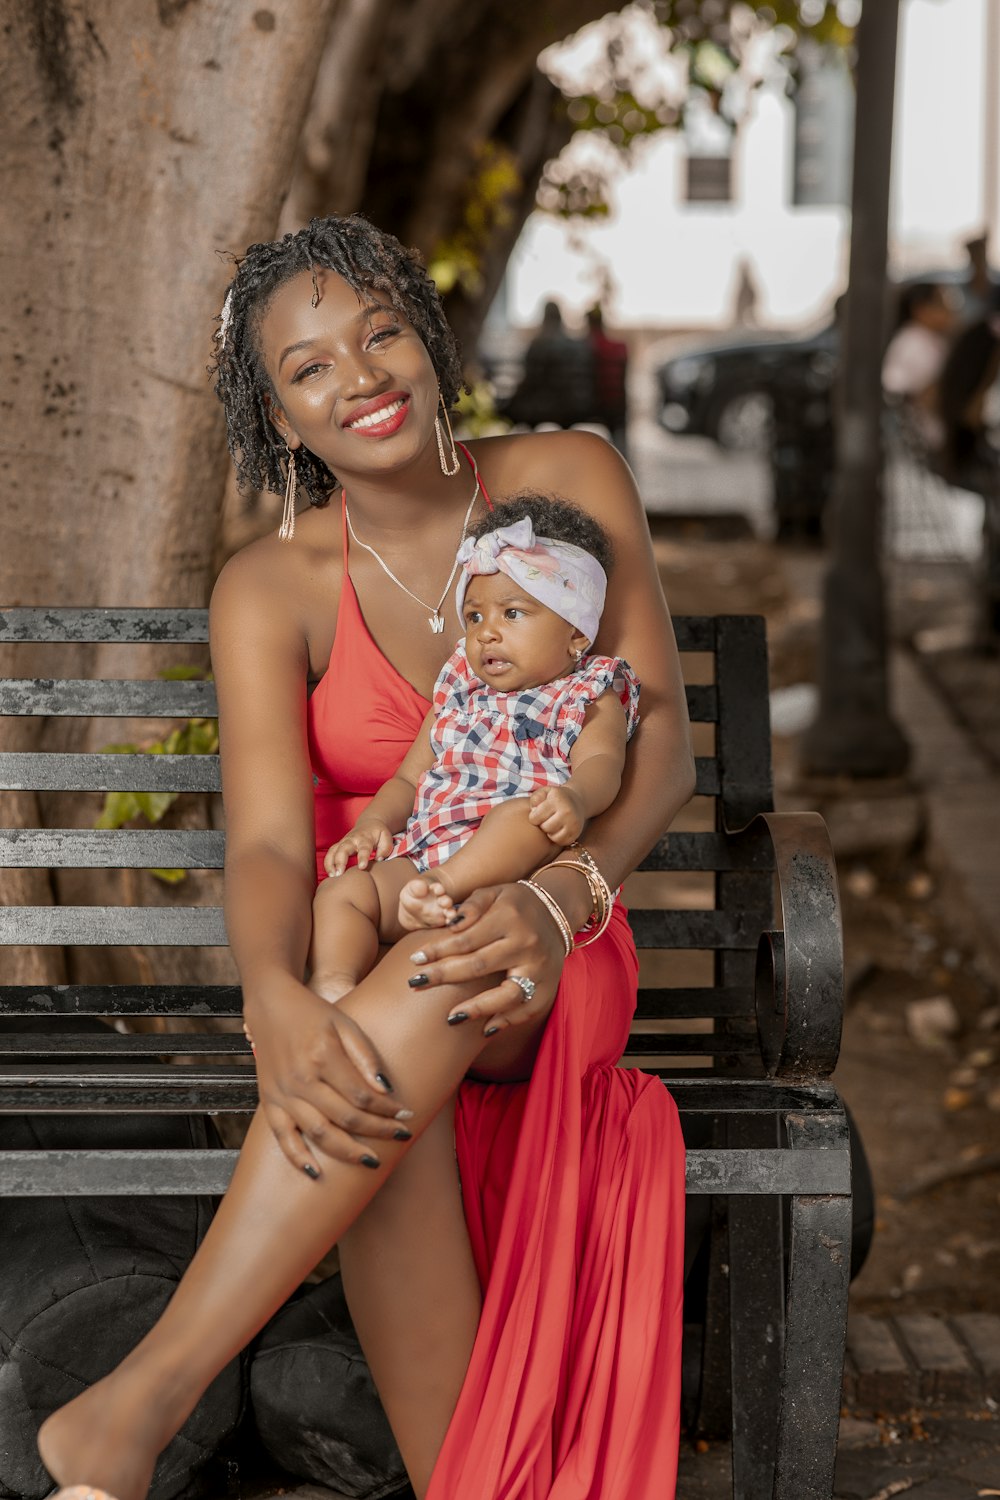 a woman sitting on a bench holding a baby